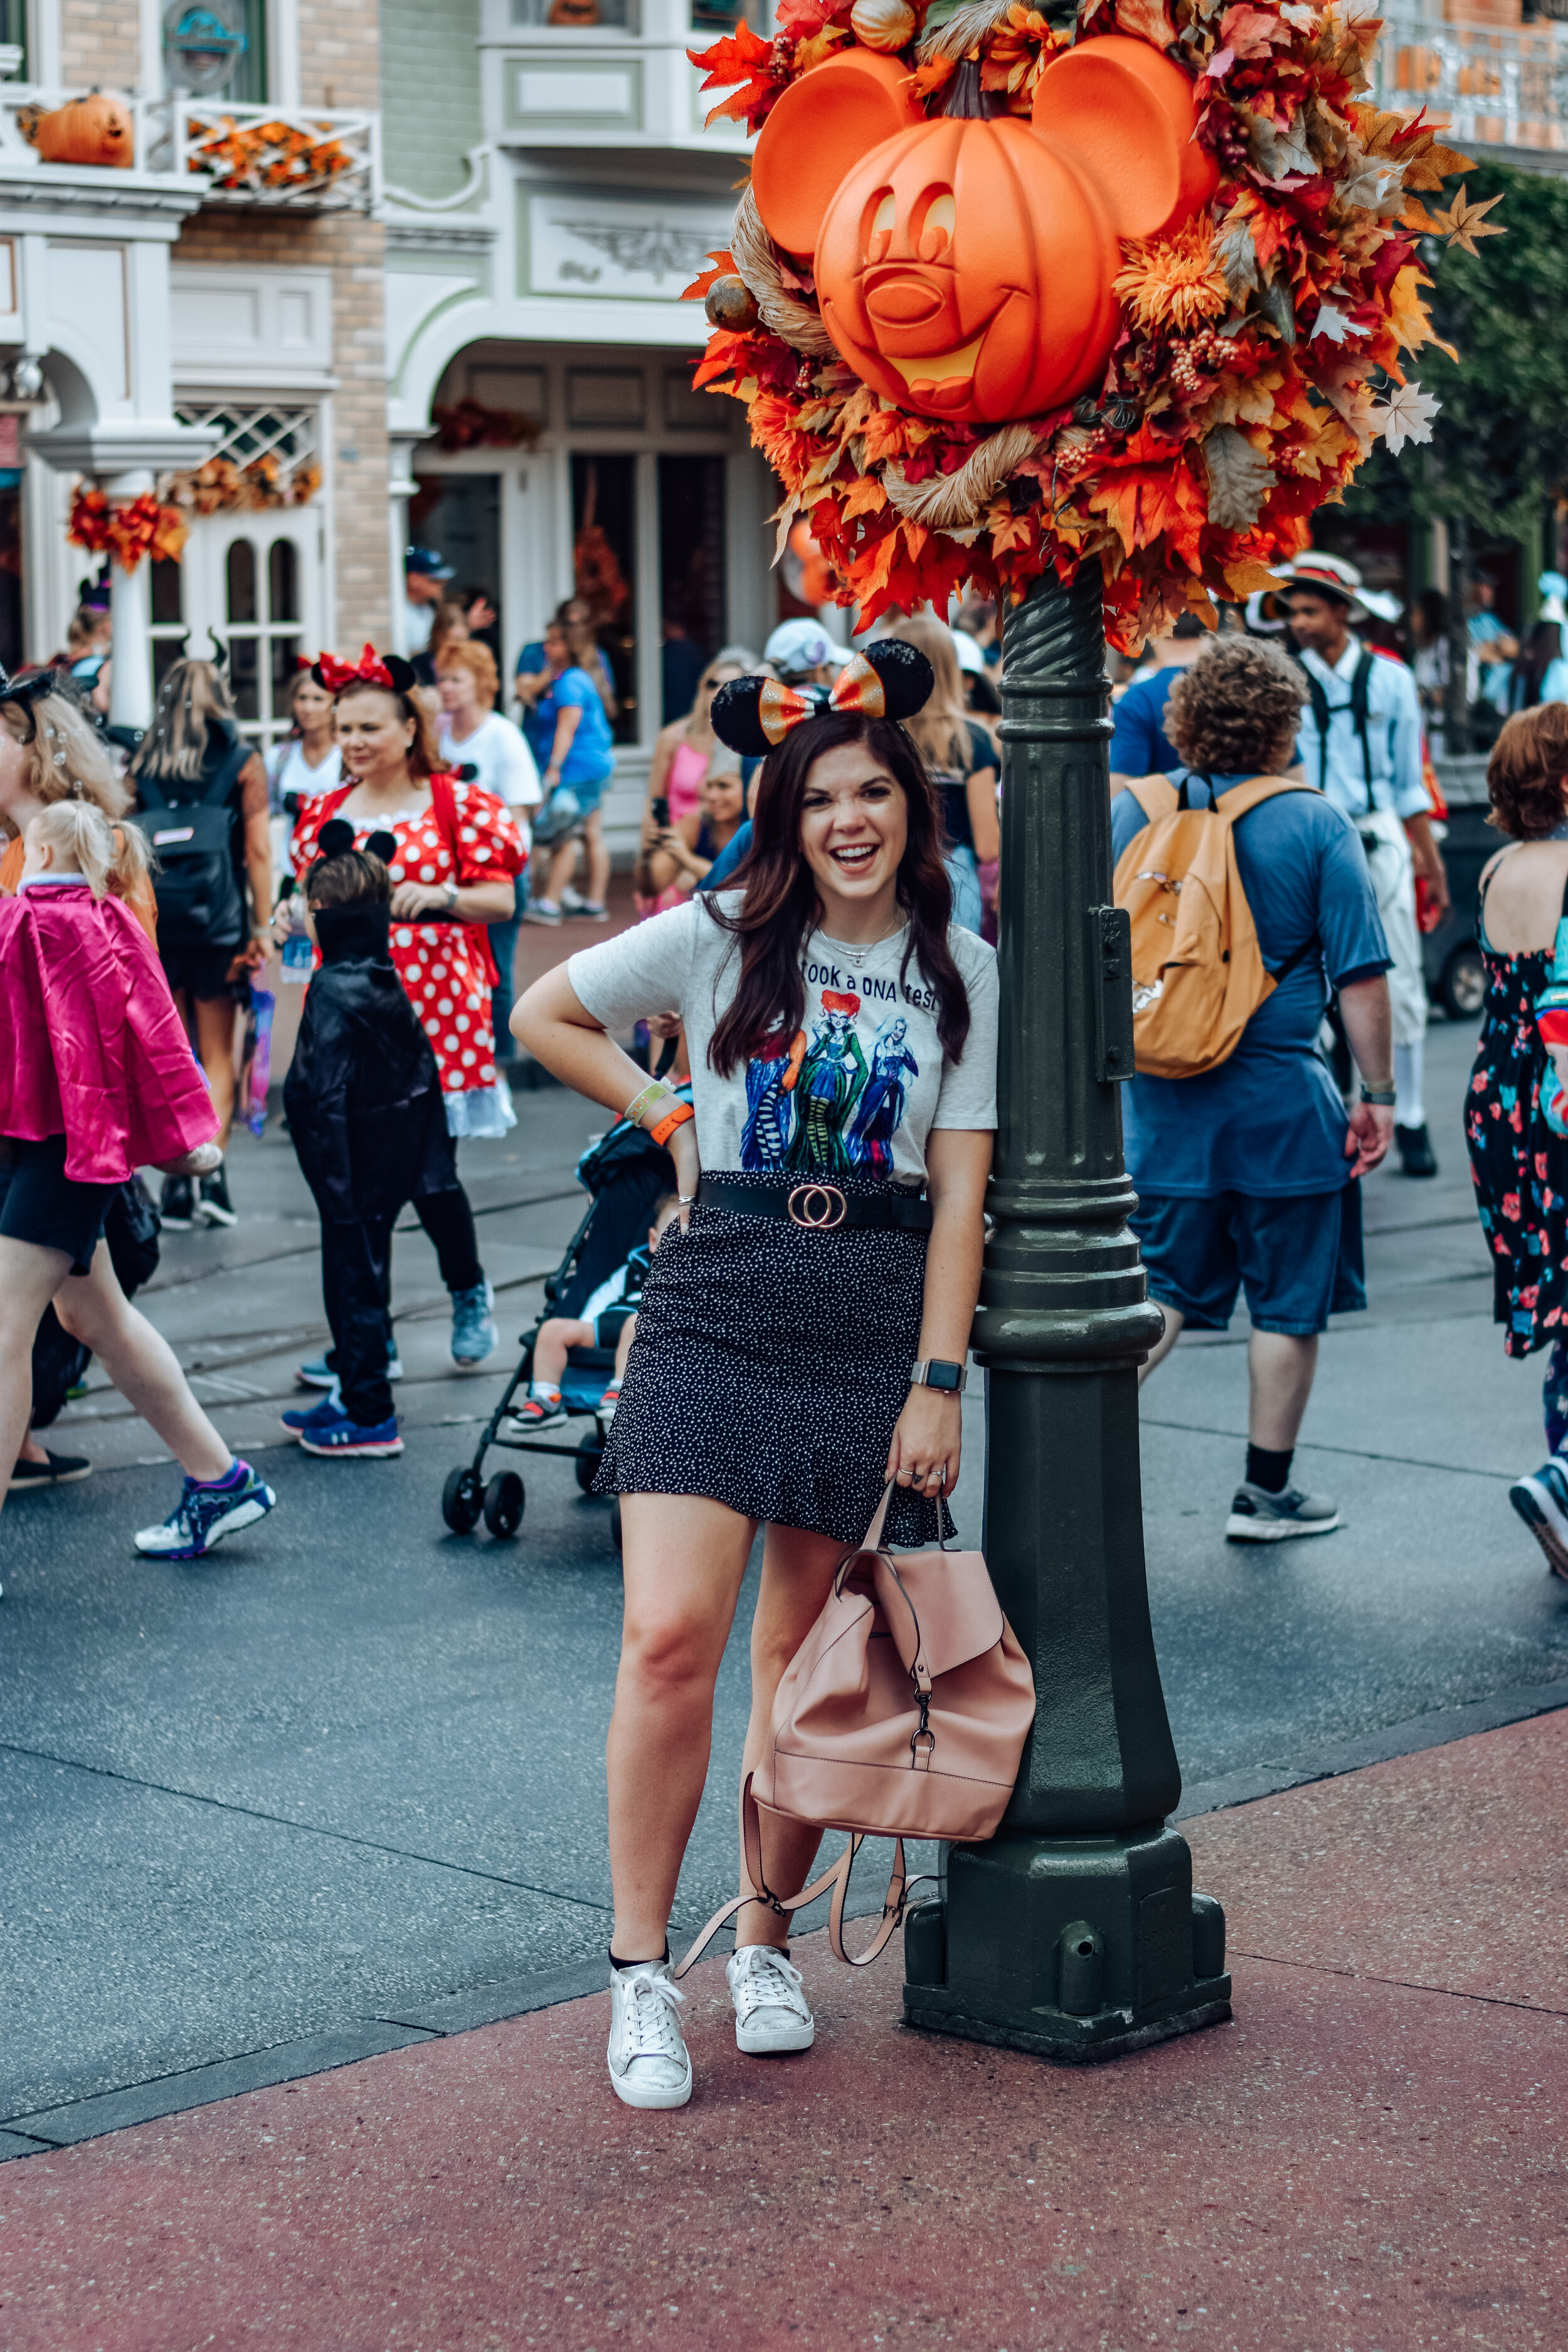 woman leaning on a pole at disney celebrating Halloween at Disney World